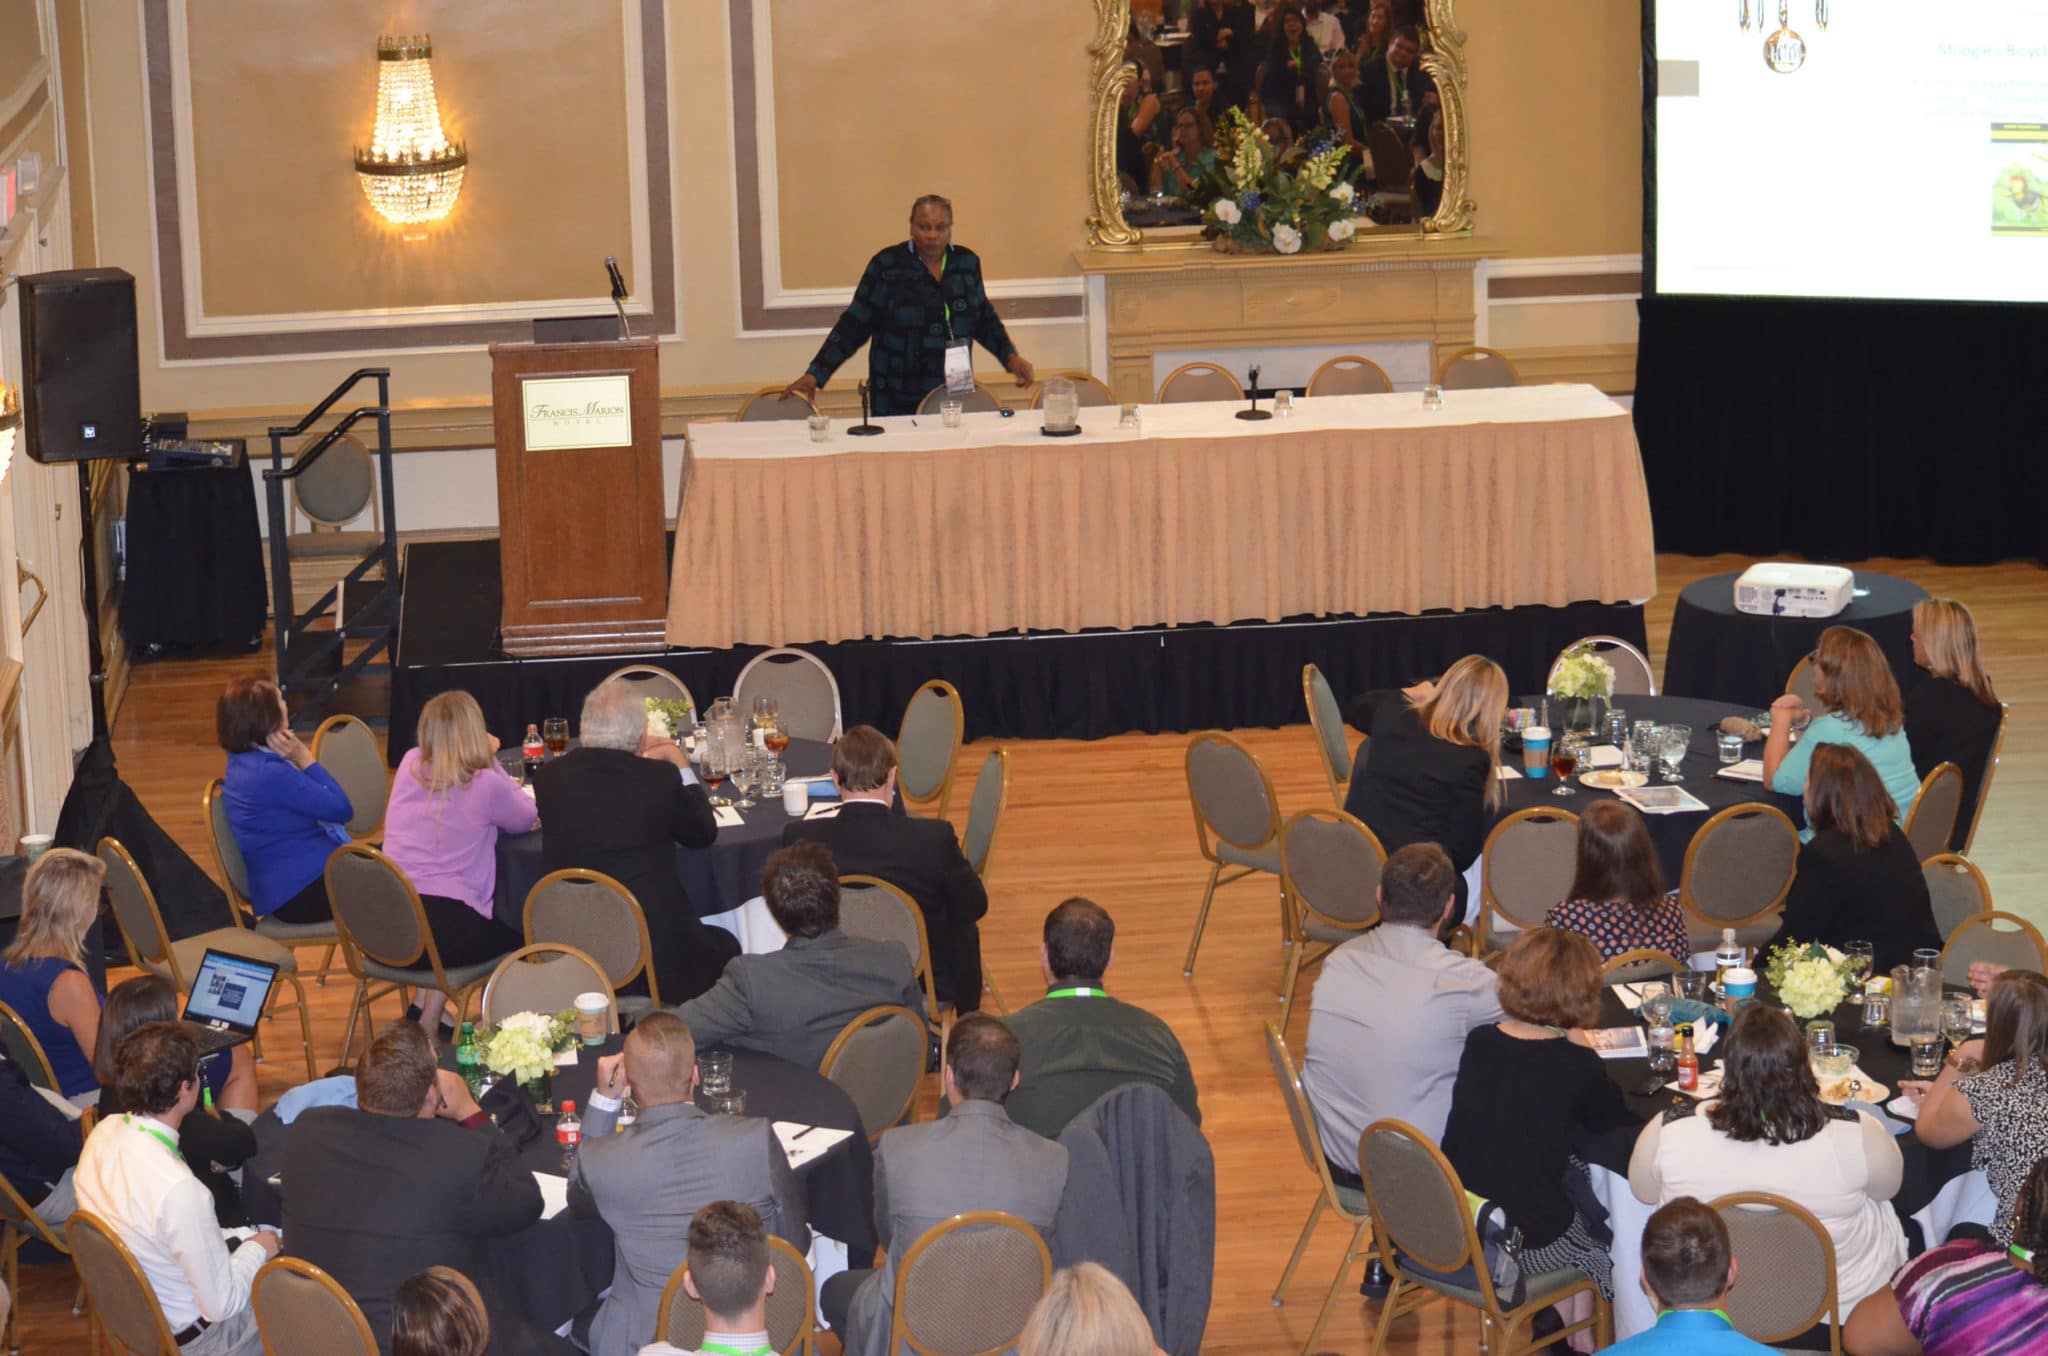 On September 24-27, 2017 Community Options hosted its 11th Annual iMatter Conference A Meaningful Life Conference on Supported Employment at the Francis Marion Hotel in Charleston, SC.